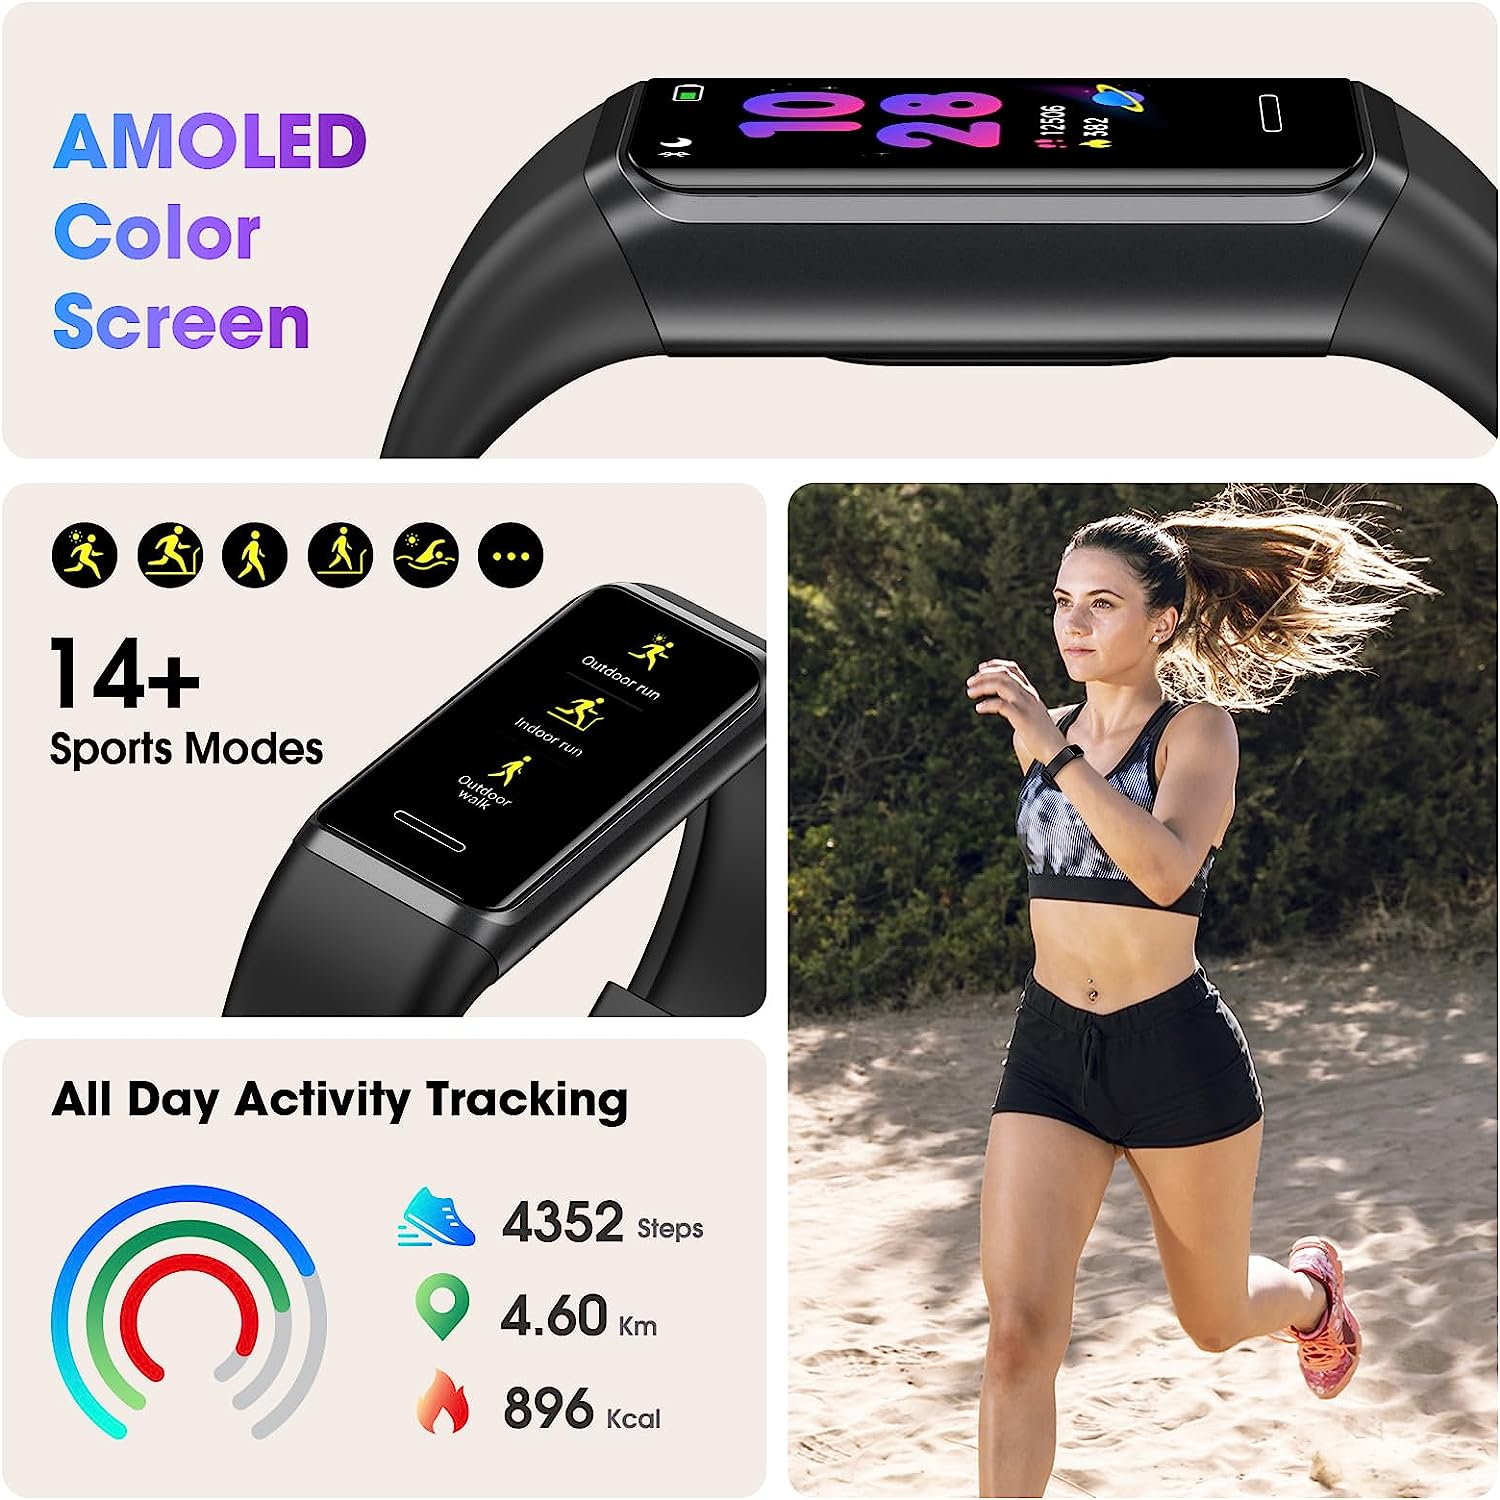 LIVIKEY Deed Fitness Tracker Compatible with Alexa Built-in, Heart Rate, Blood Oxygen, Sleep Monitor, Fitness Watch with Pedometer, IP68 Swimming Waterproof, Smart Watch with Step Tracker